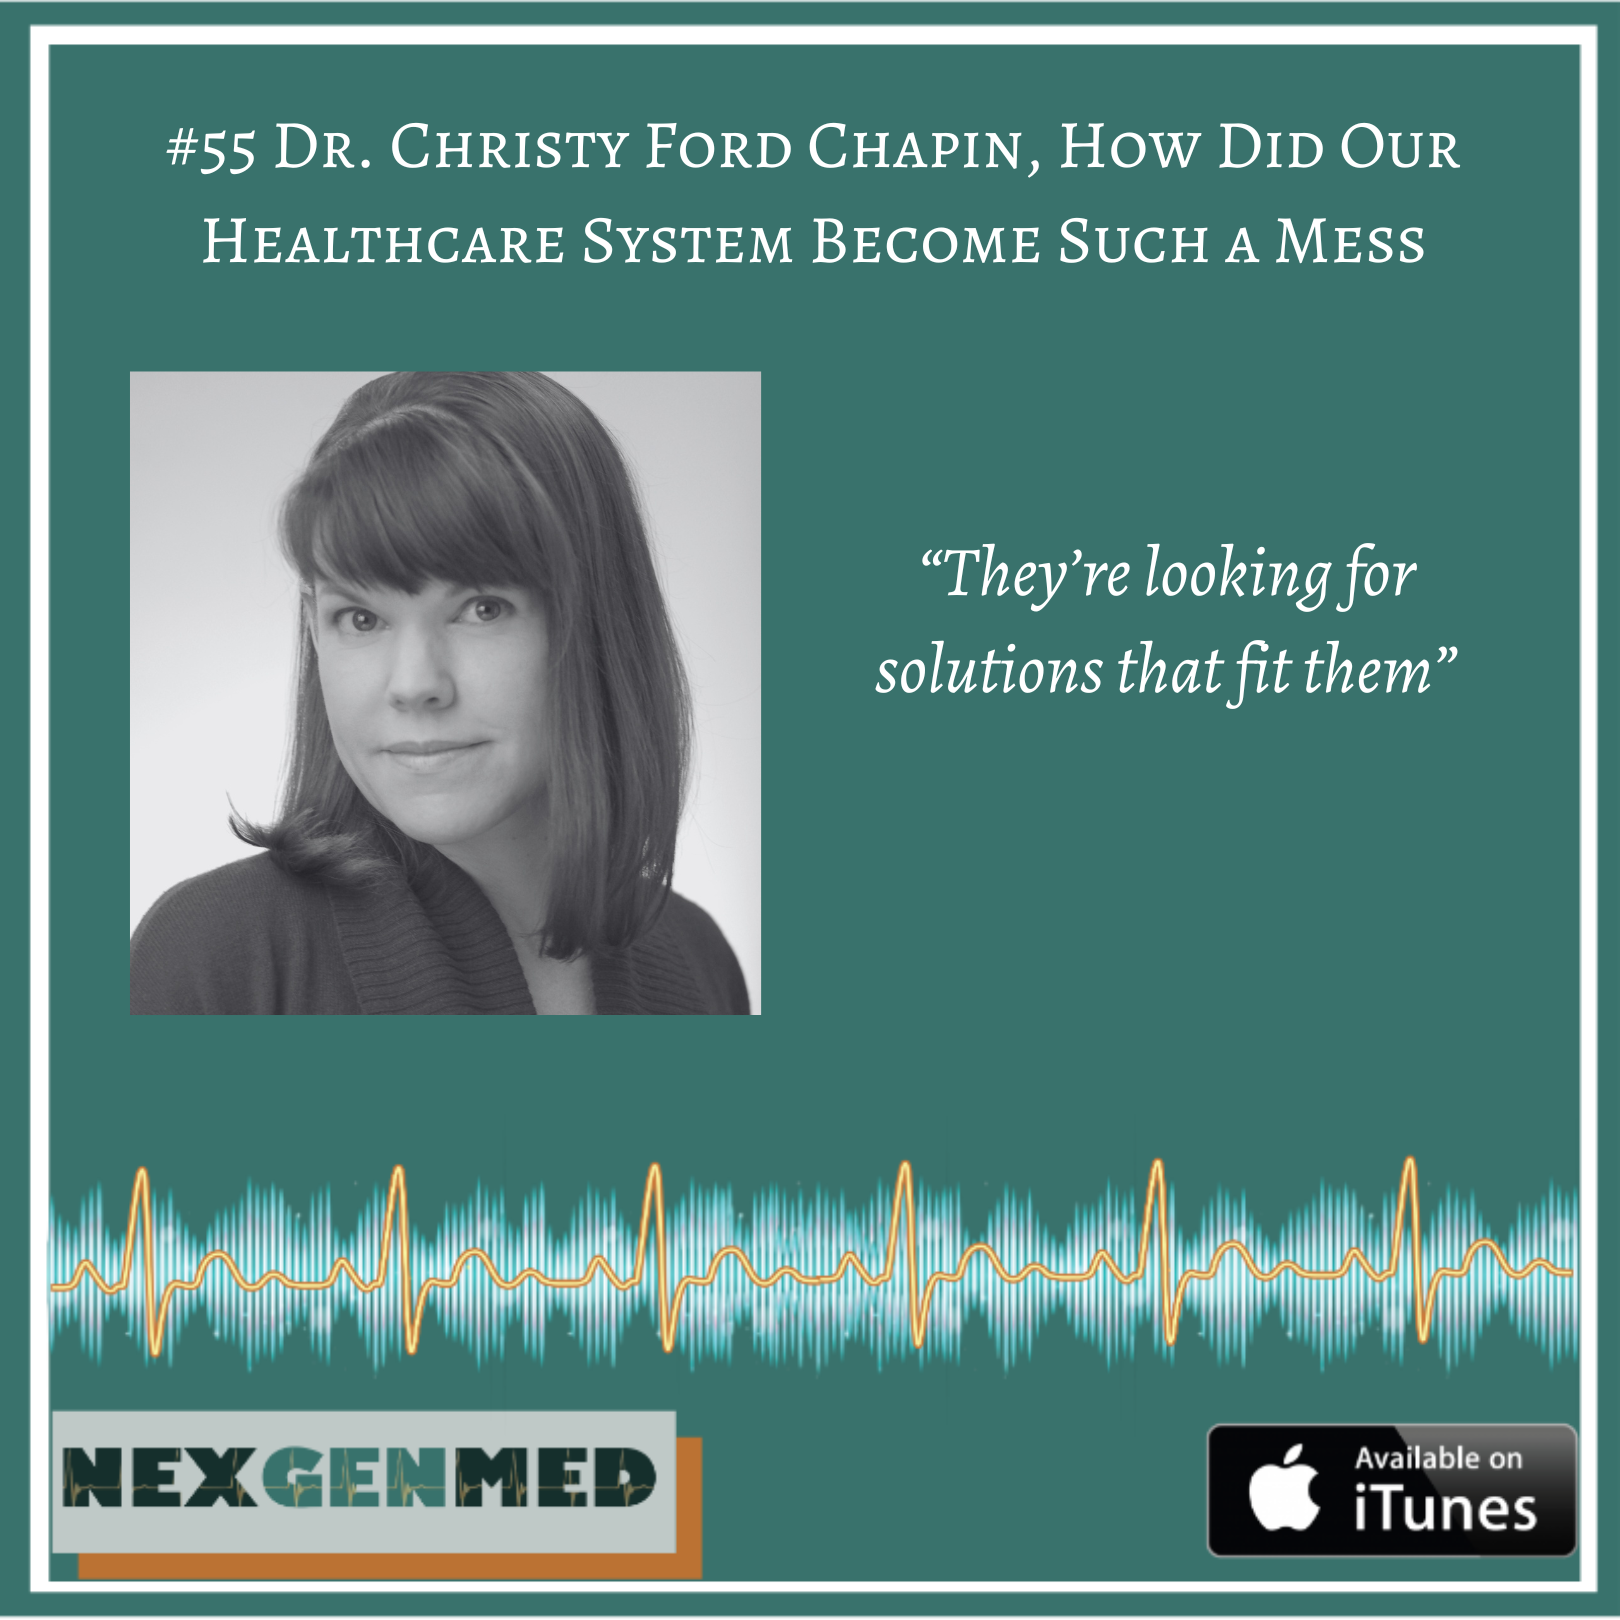 Dr. Christy Ford Chapin on the NexGenMed podcast from the Benjamin Rush Institute